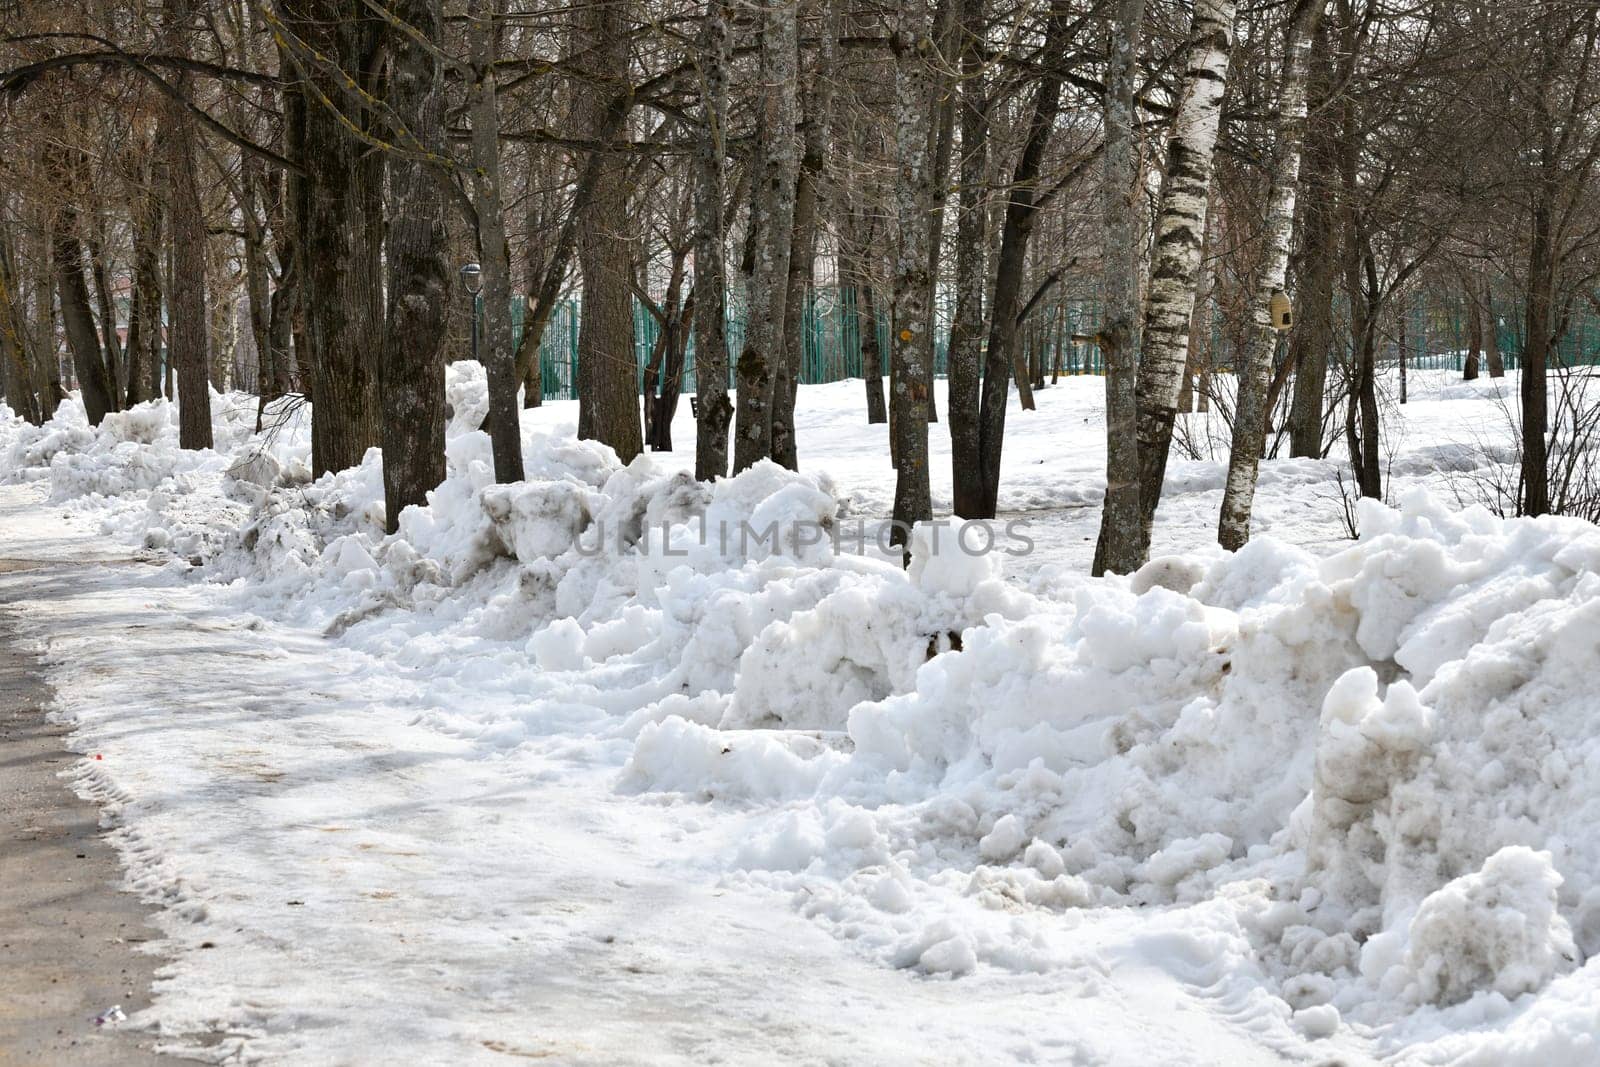 Drifts of dirty snow in a park in early spring by olgavolodina